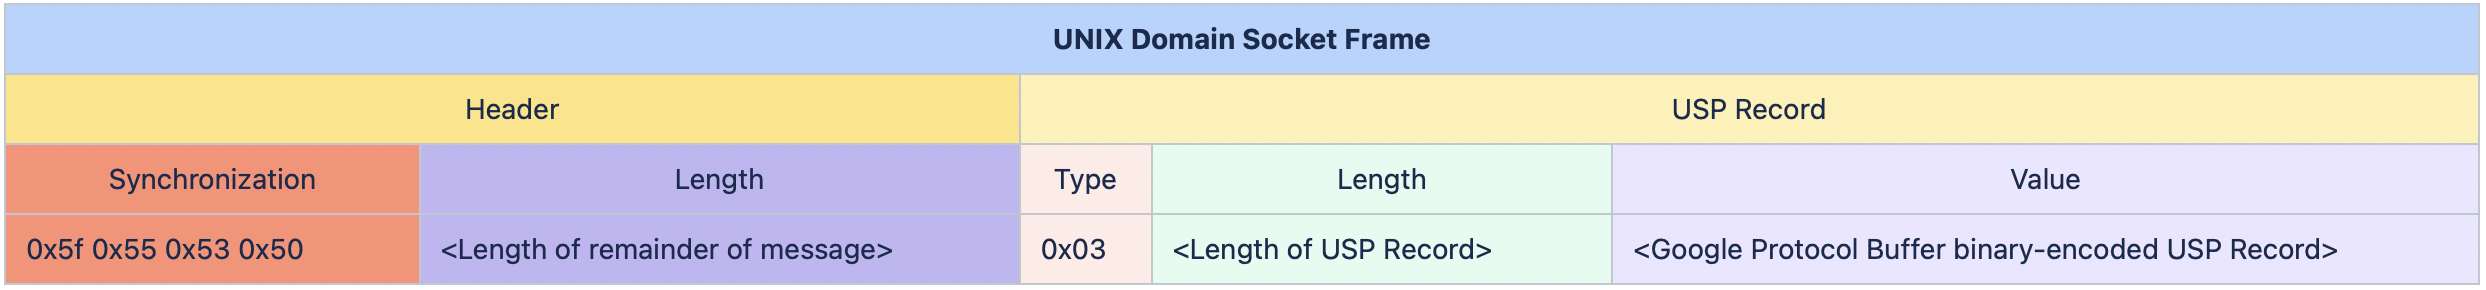 UNIX Domain Socket Frame with USP Record Message